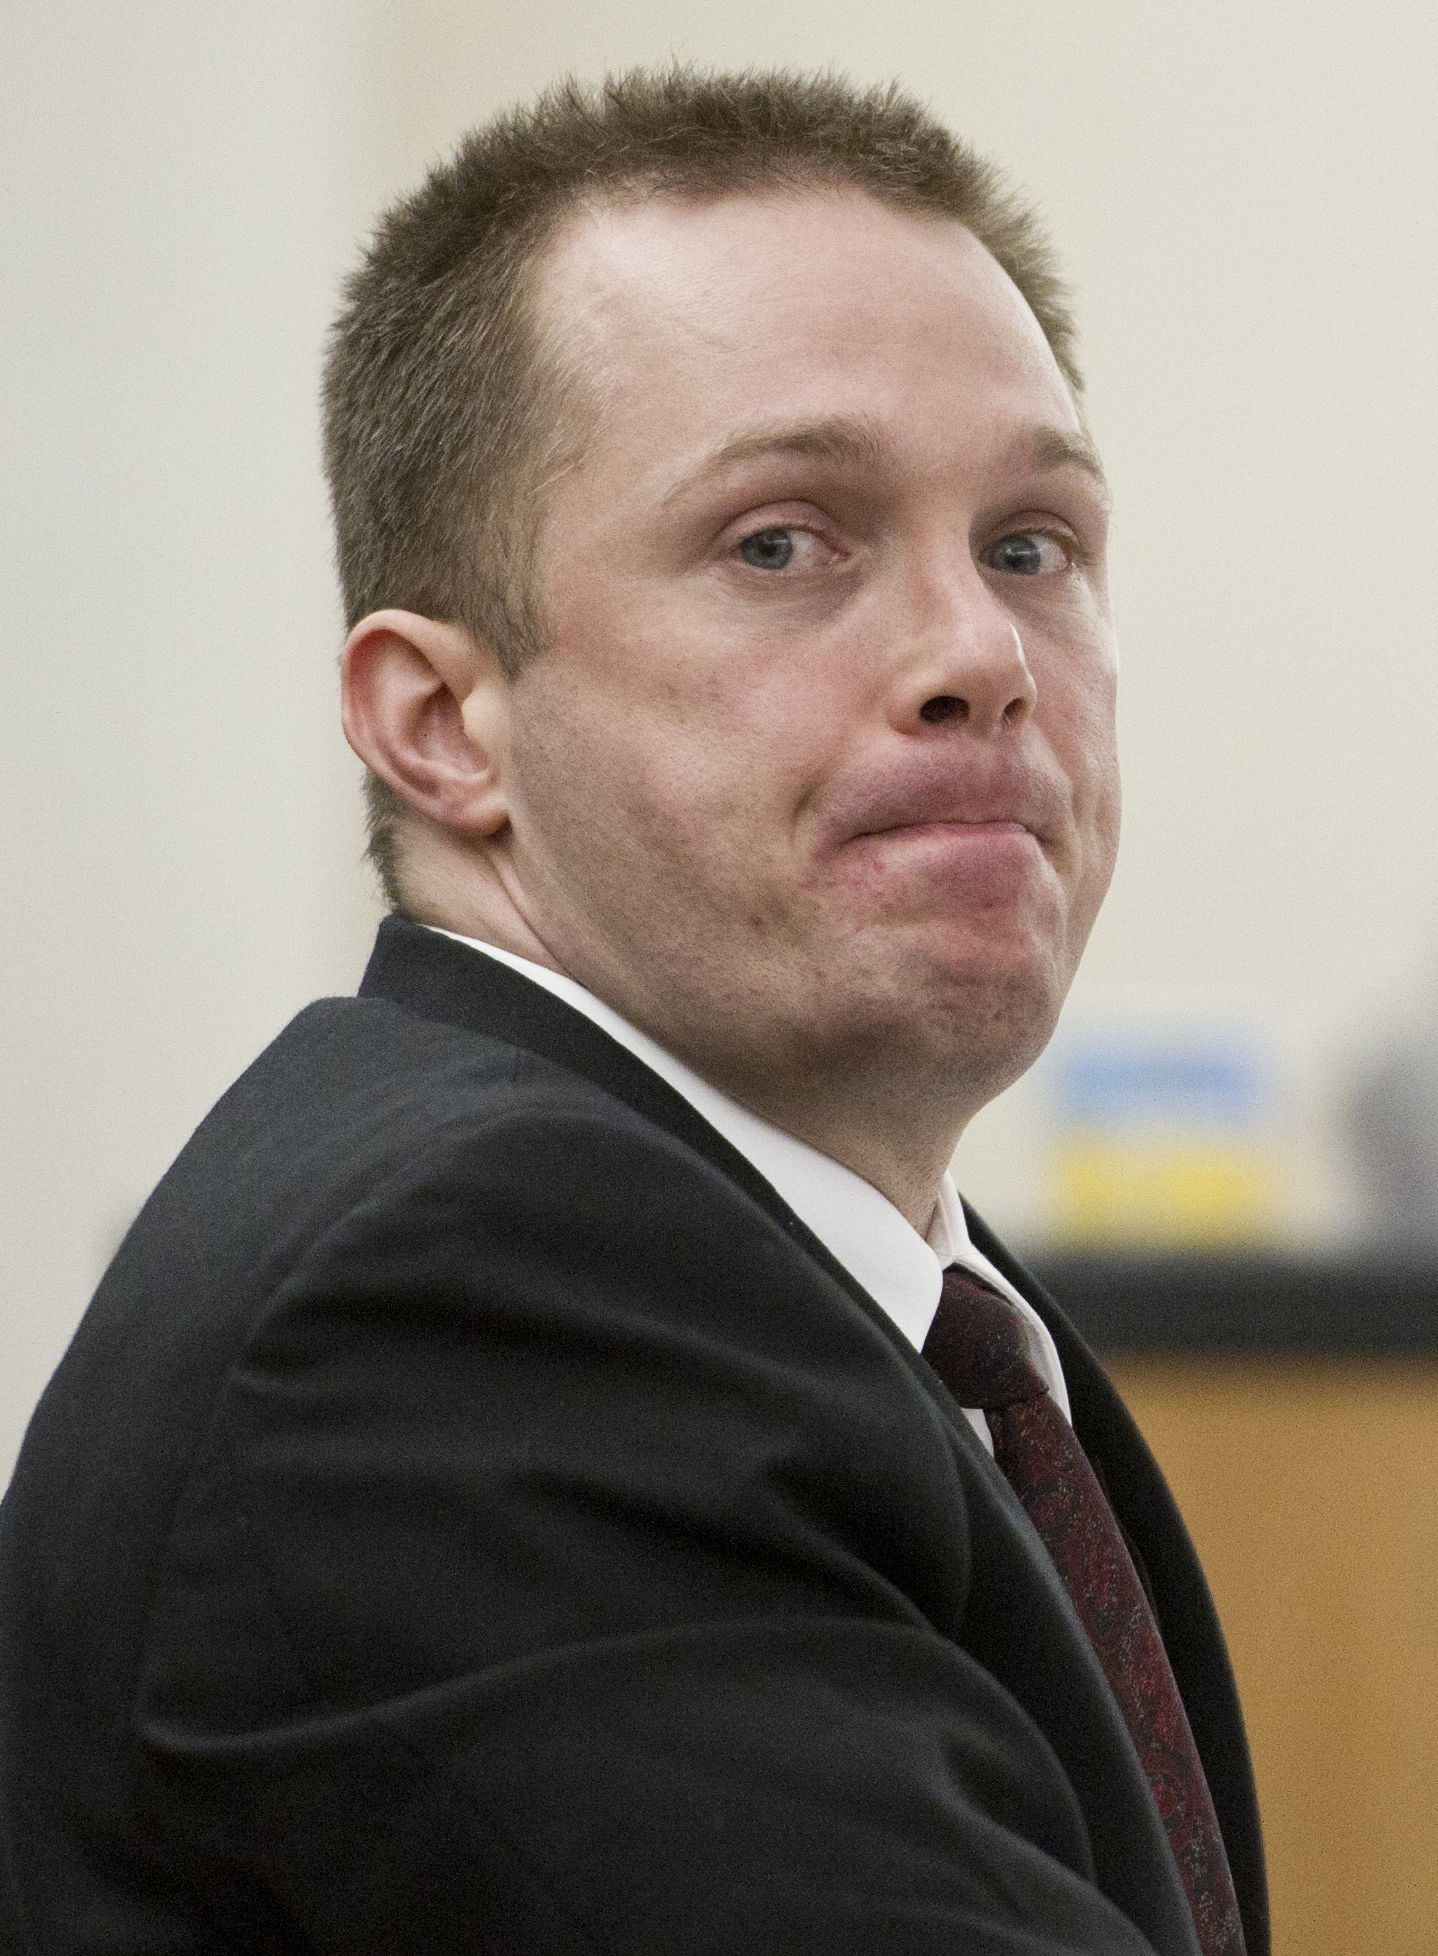 Christopher D. Strawn appears in Juneau Superior Court on Wednesday during jury selection for his trial on charges in the murder of 30-year-old Brandon C. Cook at the Kodzoff Acres Mobile Home Park Oct. 20, 2015. (Michael Penn | Juneau Empire)